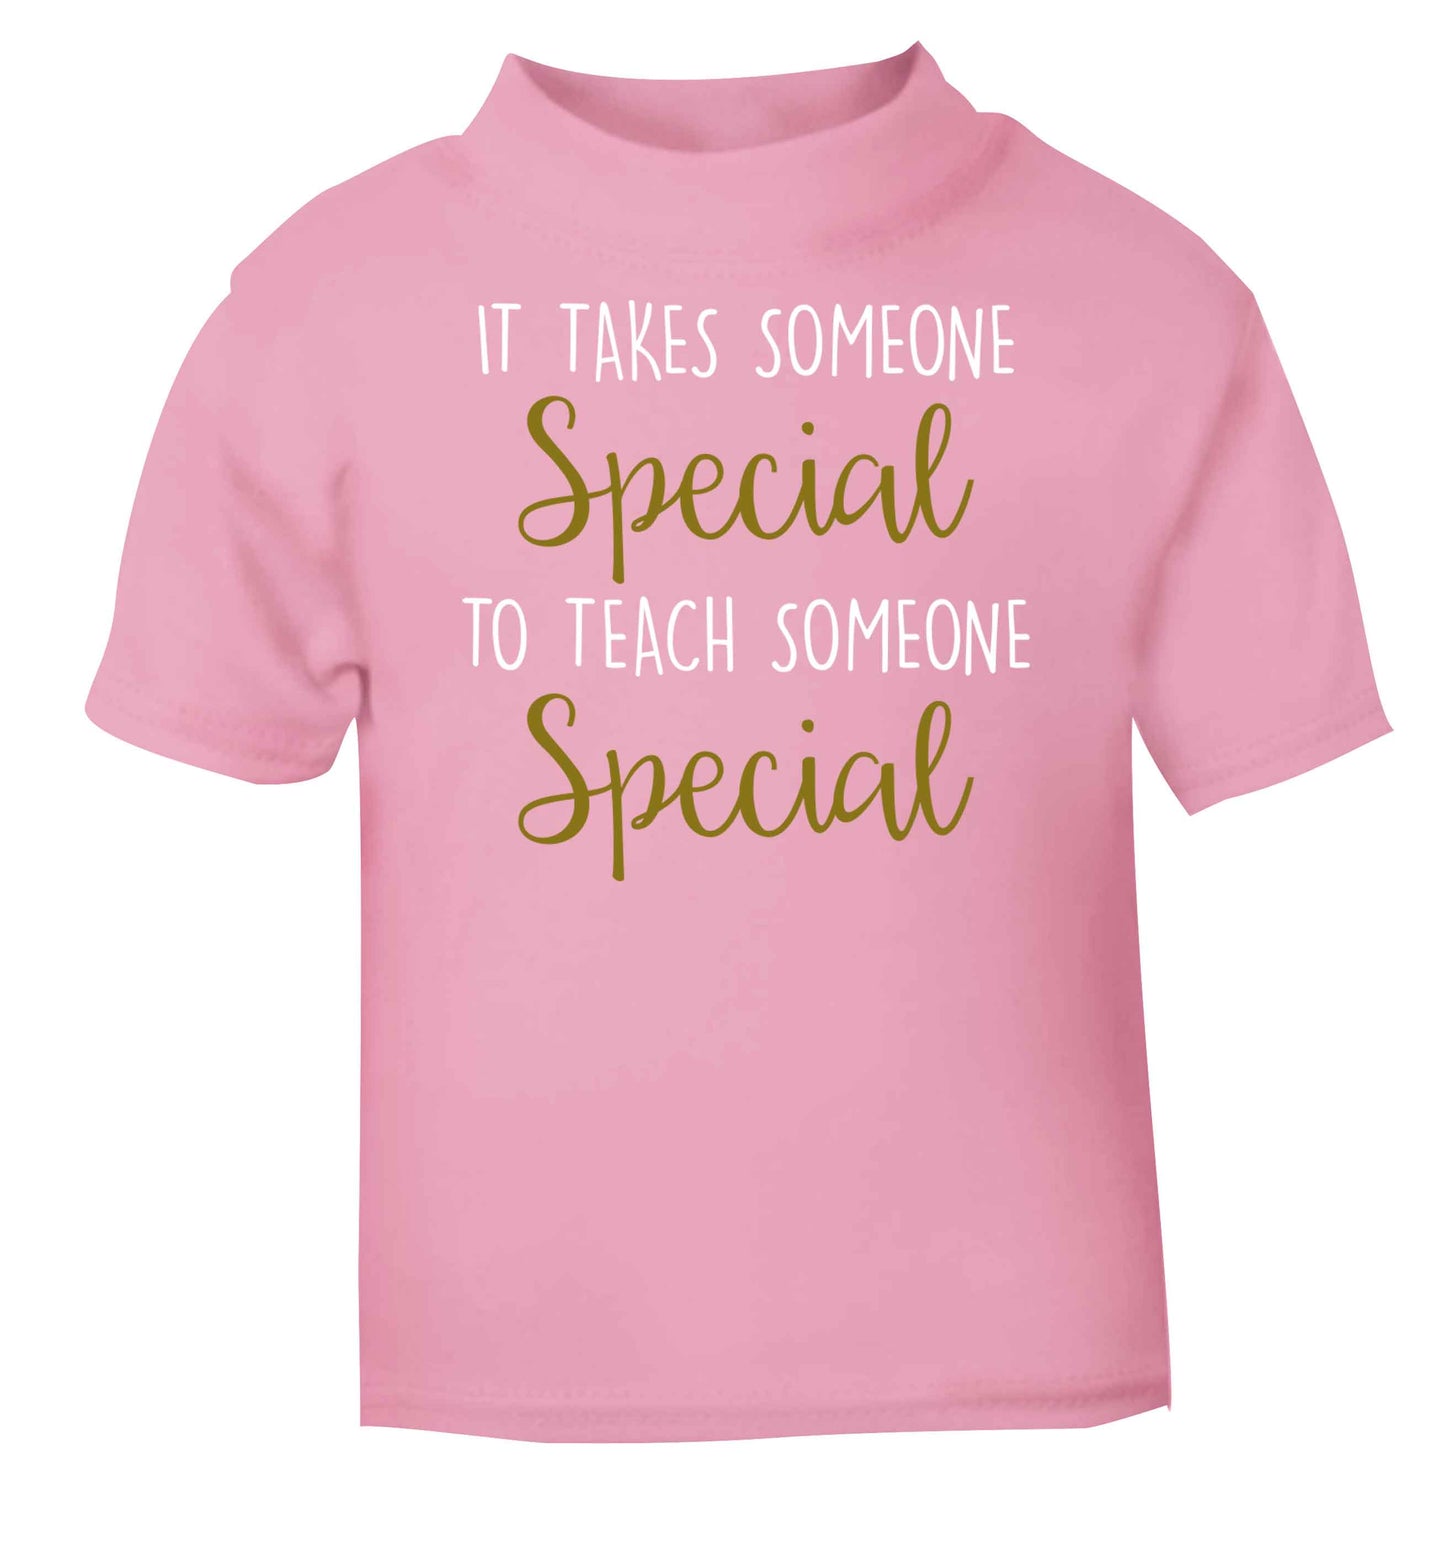 It takes someone special to teach someone special light pink baby toddler Tshirt 2 Years